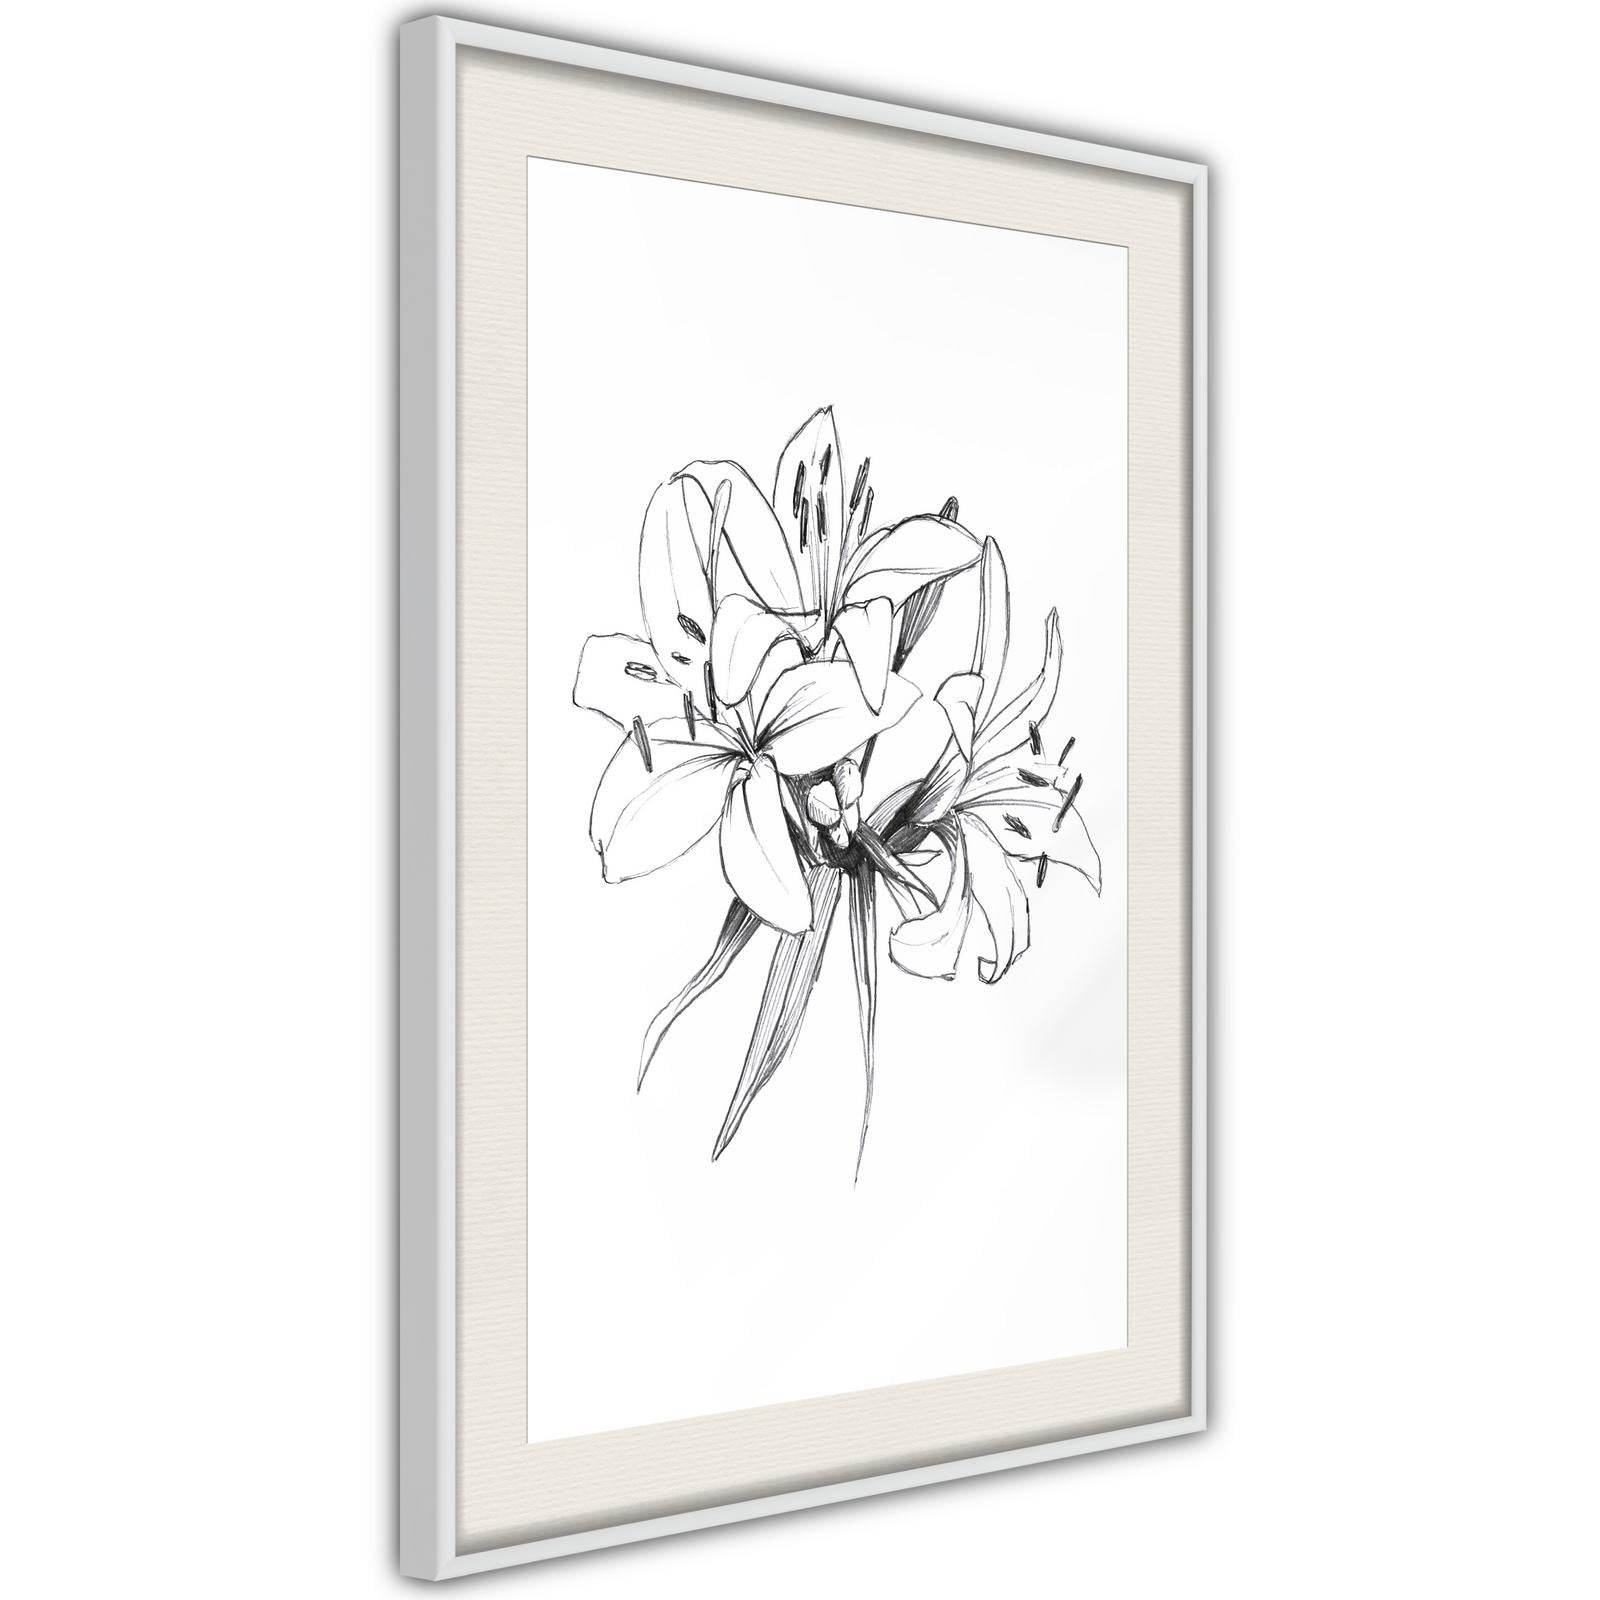 Inramad Poster / Tavla - Sketch of Lillies-Poster Inramad-Artgeist-peaceofhome.se